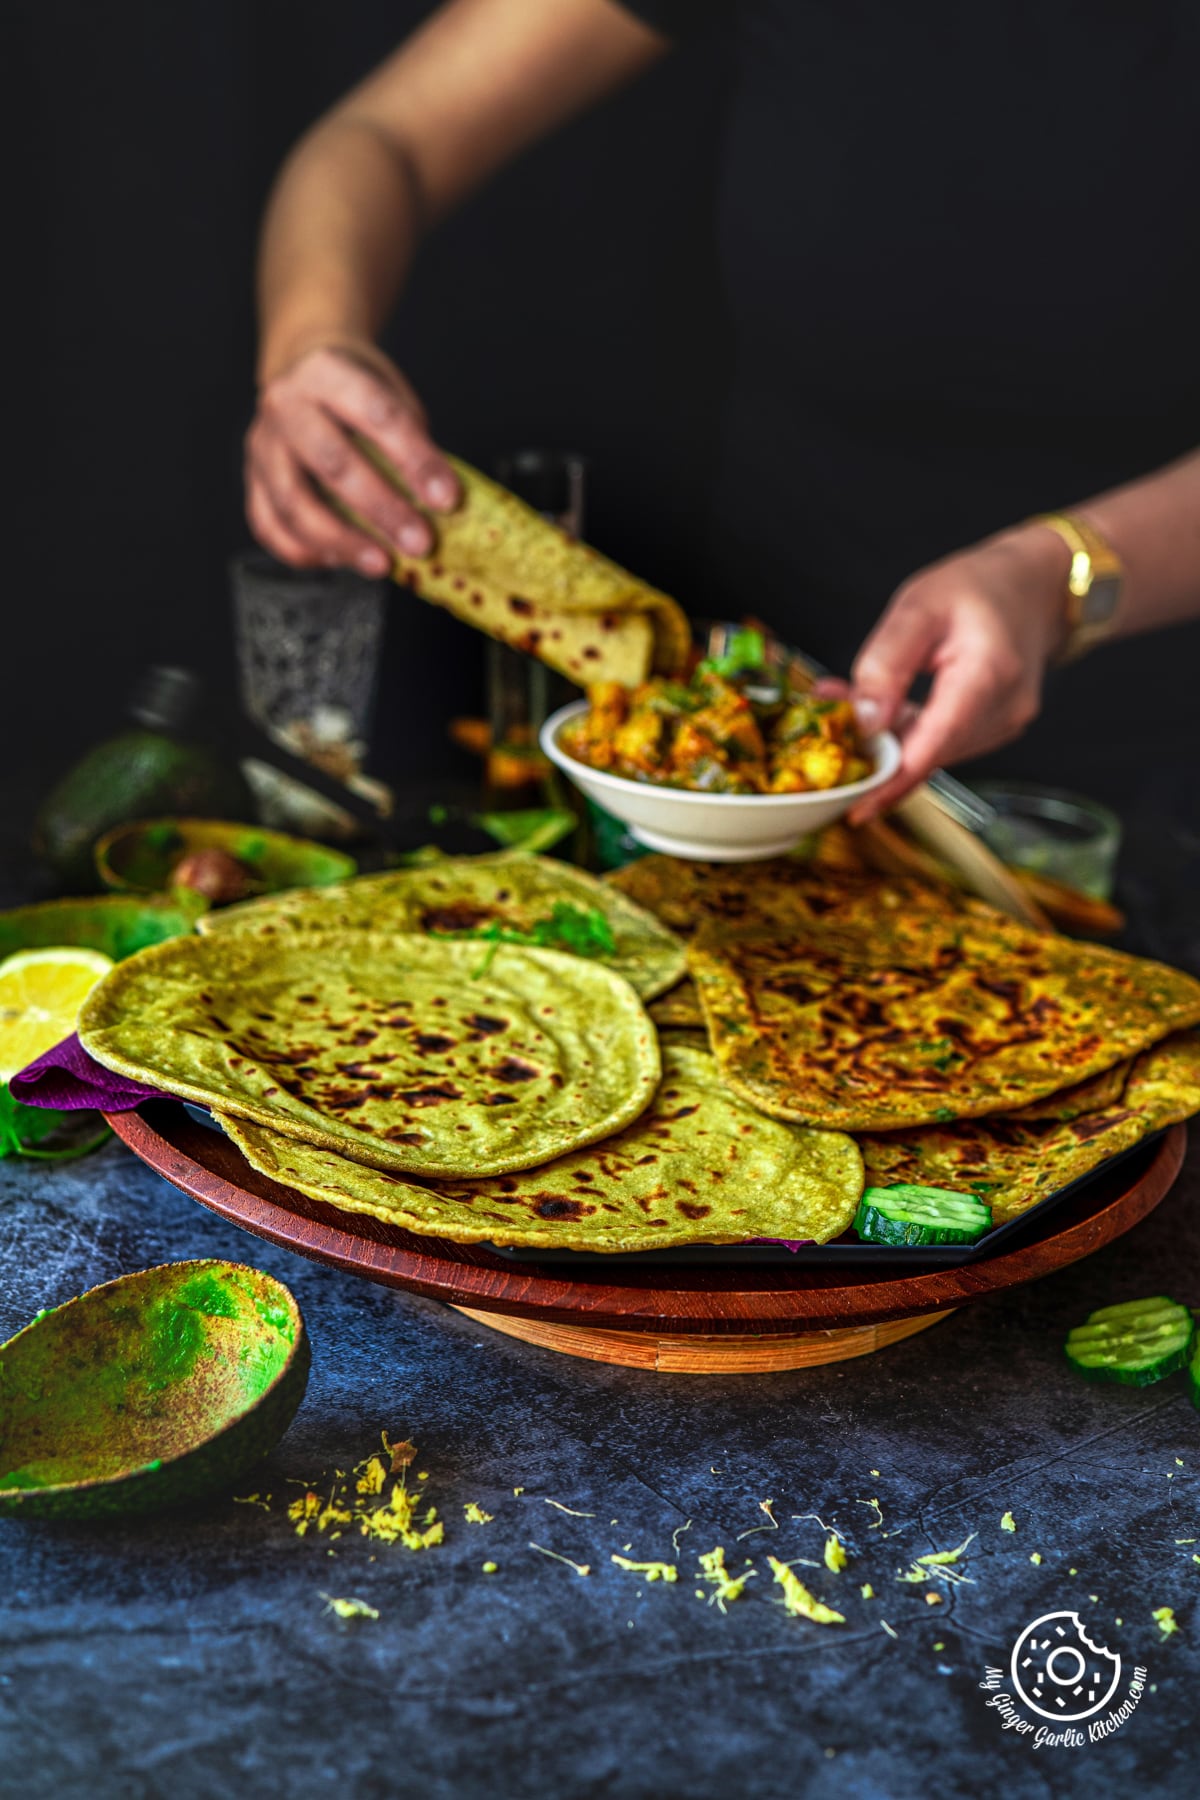 avocado parathas and avocado rotis in a wooden plate and a female holding a curry bowl and a rolled avocado roti with the other hand